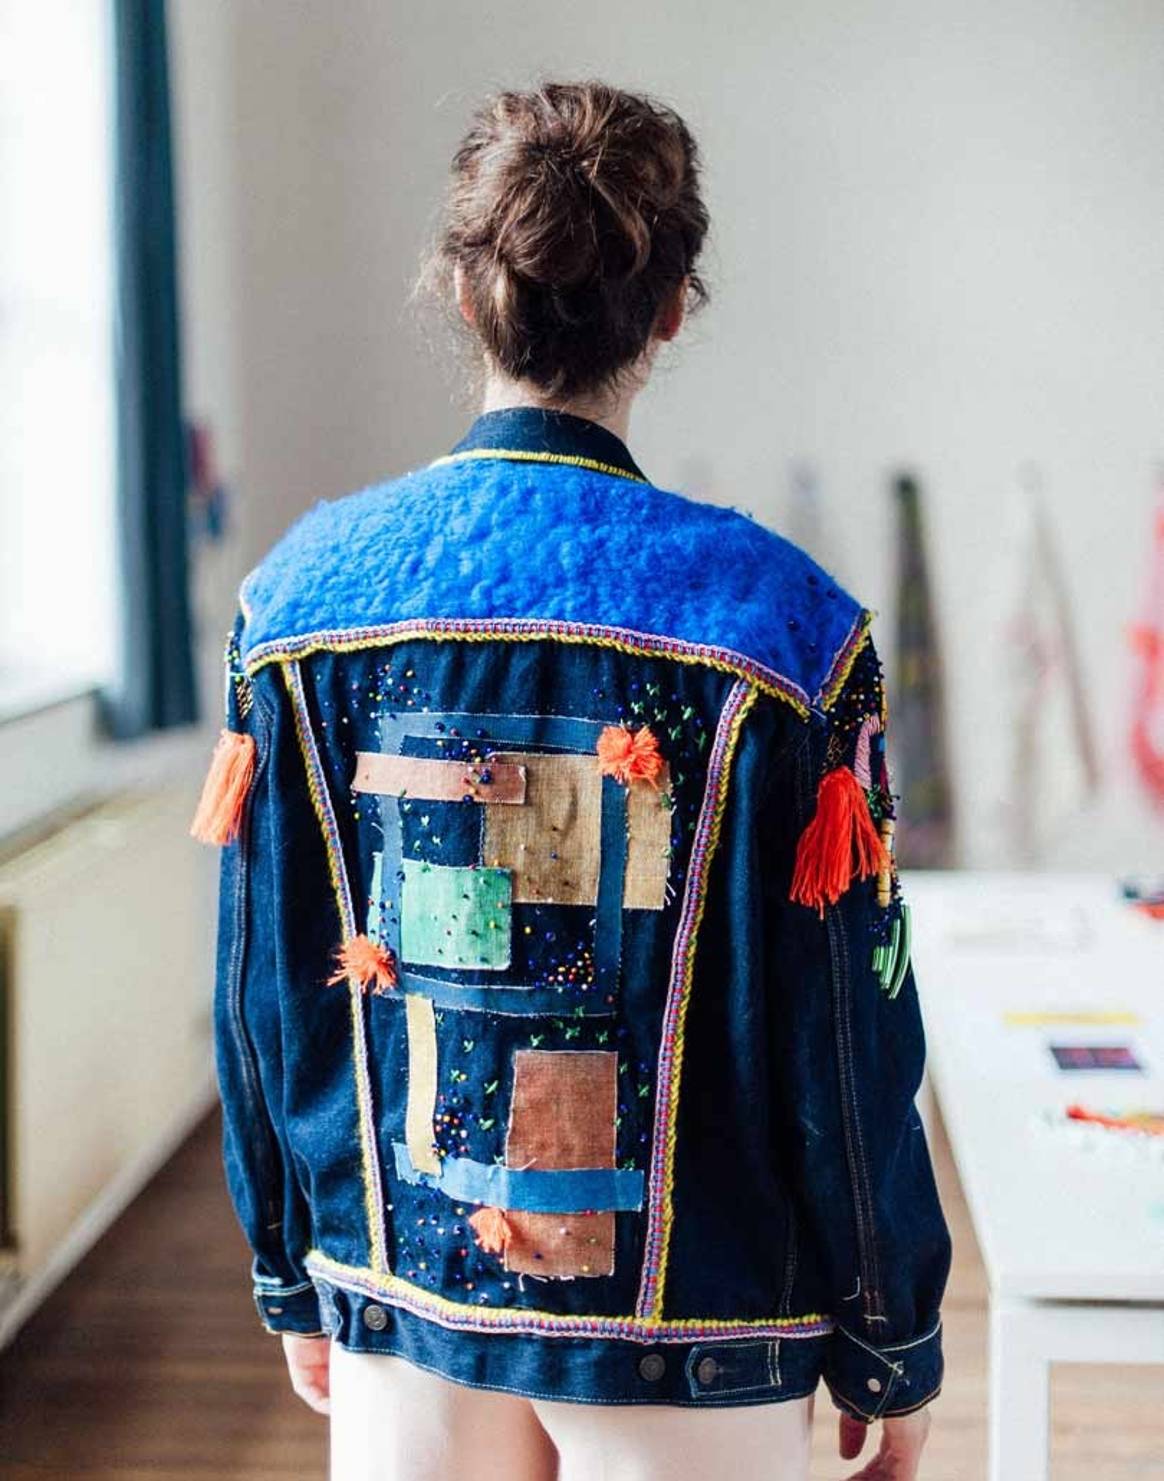 In pictures: KASK students give Levi’s Trucker Jacket a make-over